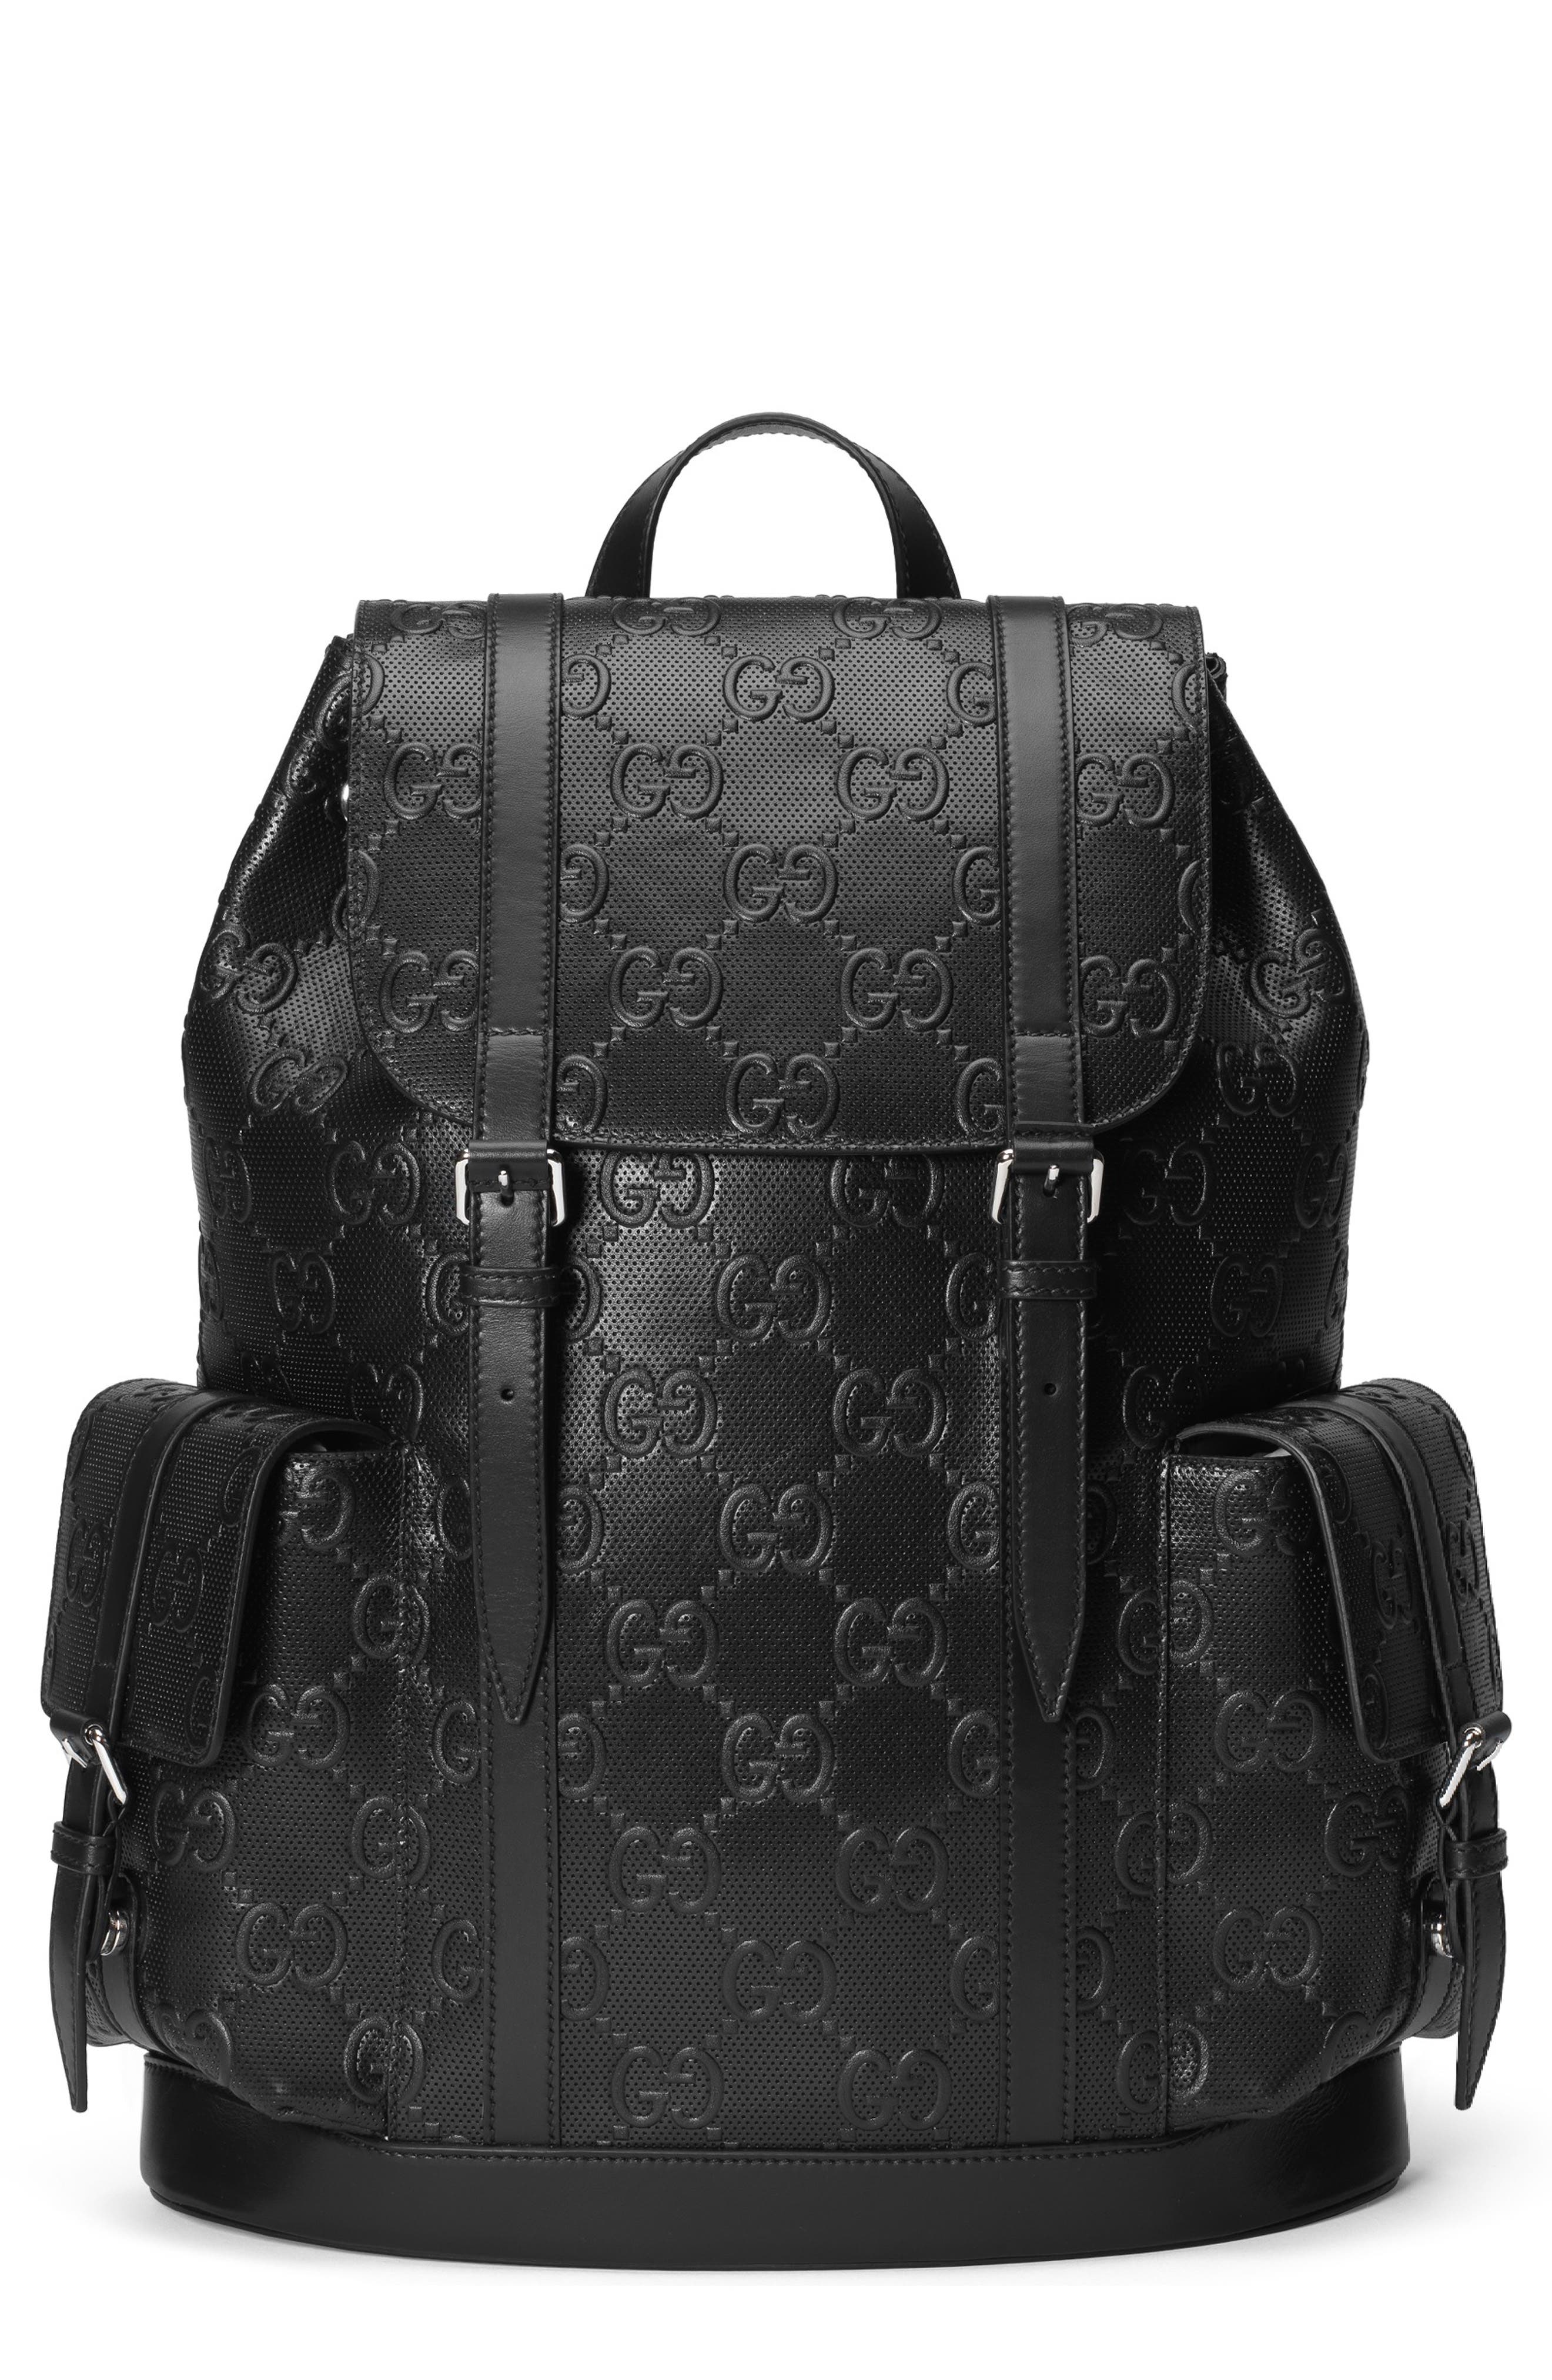 gucci double g backpack